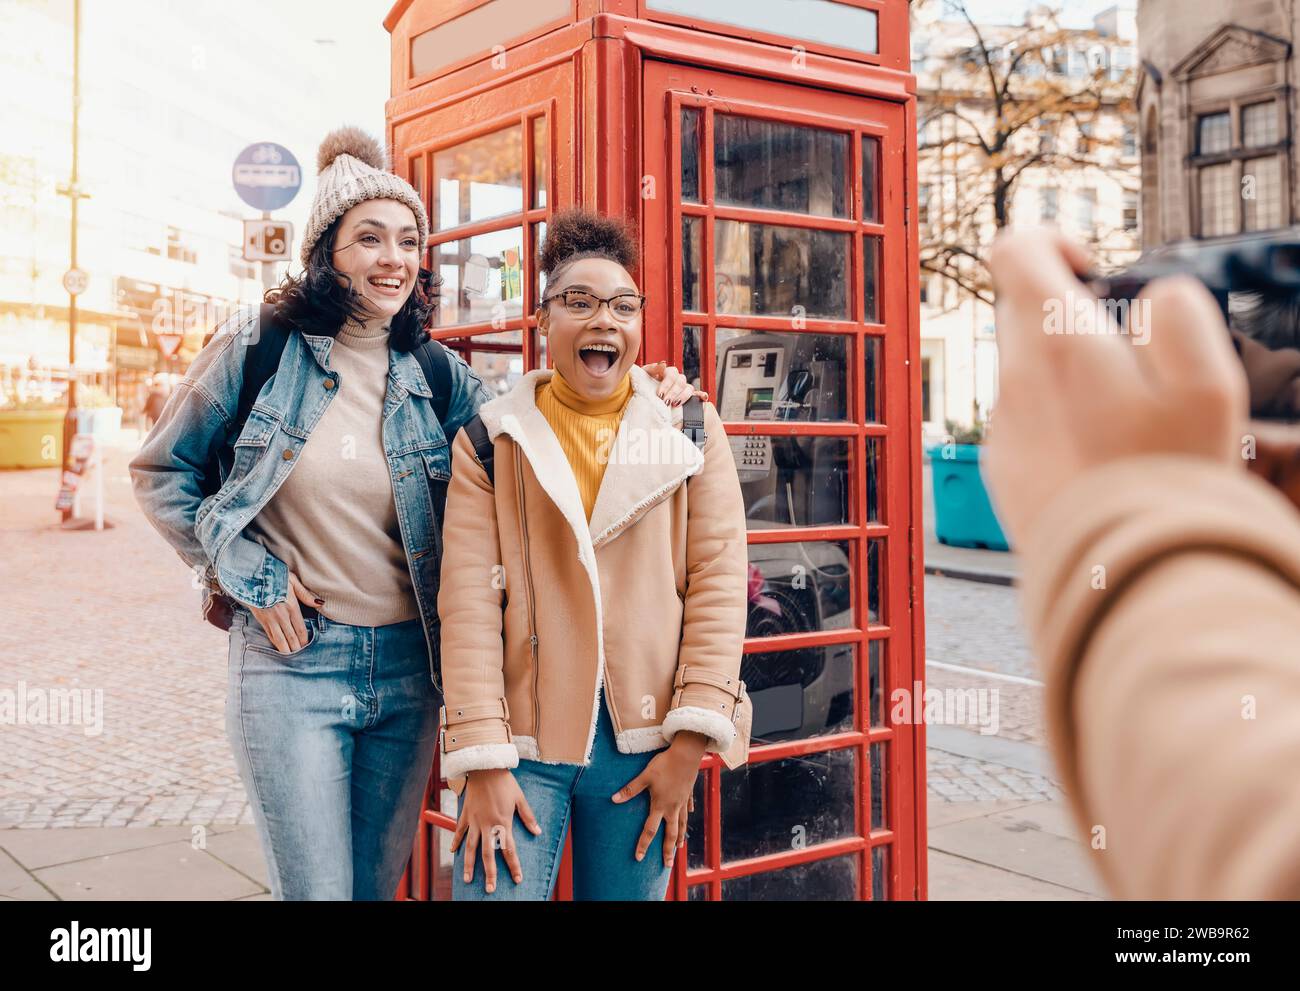 two friend, girlfriend, women using  camera and taking photos against a red phonebox in the city of England.Travel Lifestyle concept Stock Photo